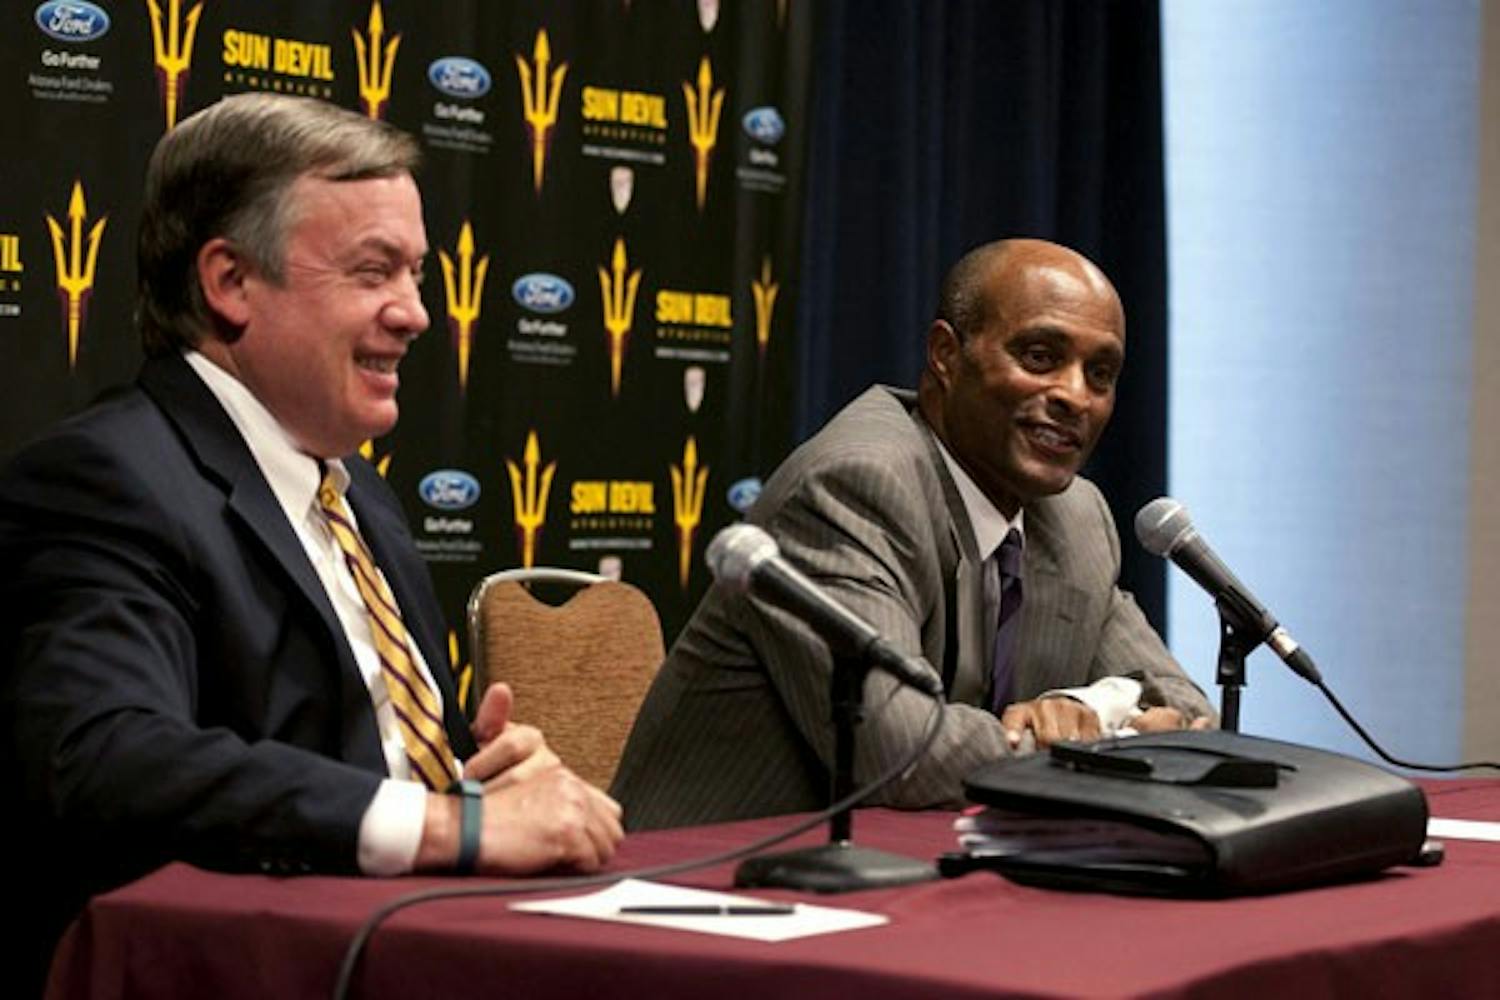 Ray Anderson, ASU's new athletic director, is introduced by President Michael Crow at a press conference on Thursday, Jan. 9. Both said they see the transition as a new opportunity as well as a new destination for Anderson's career. (Photo by Mario Mendez)